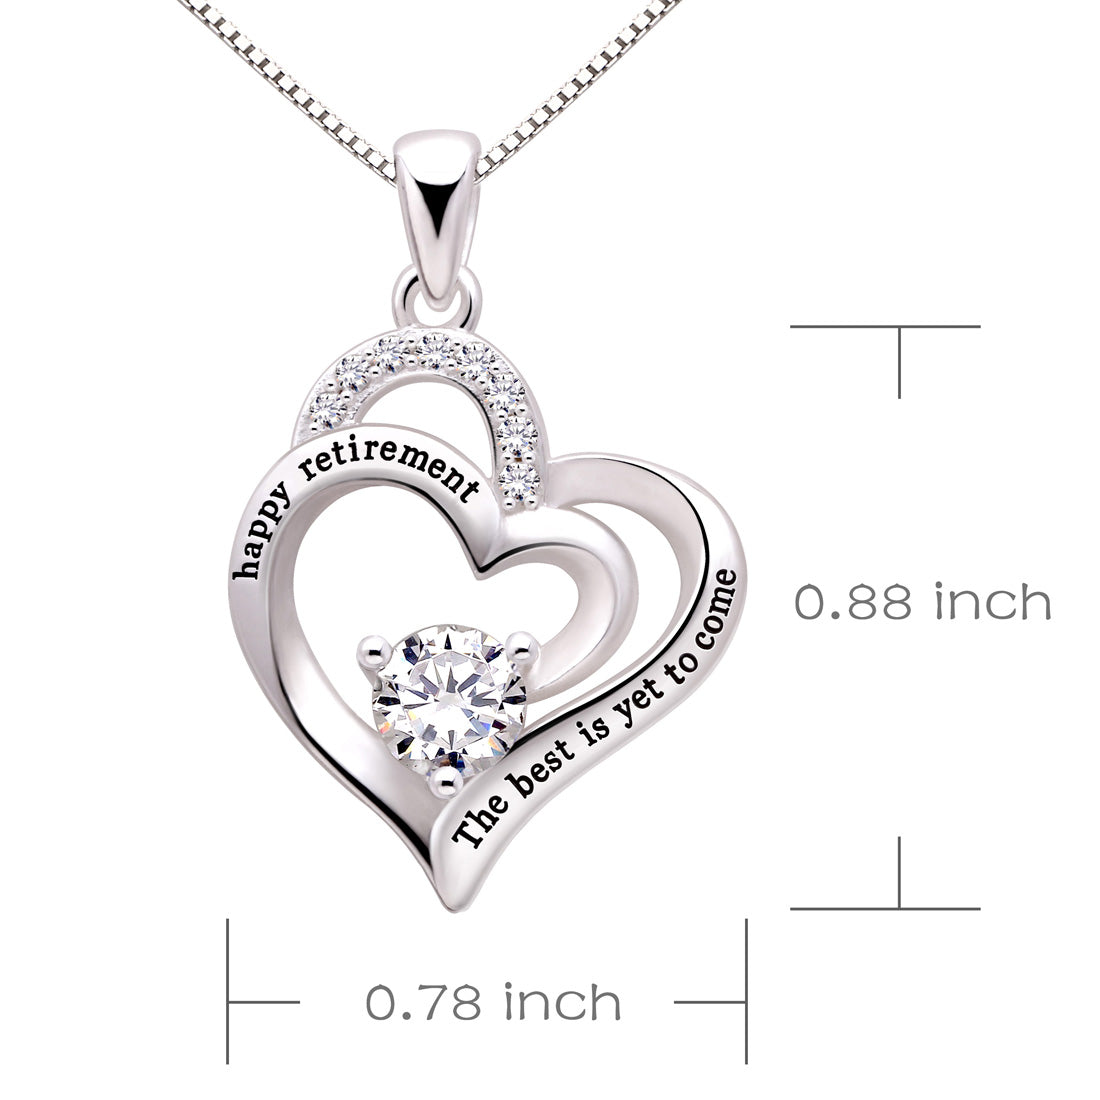 ALOV Jewelry Sterling Silver happy retirement the best is yet to come Love Heart Cubic Zirconia Pendant Necklace